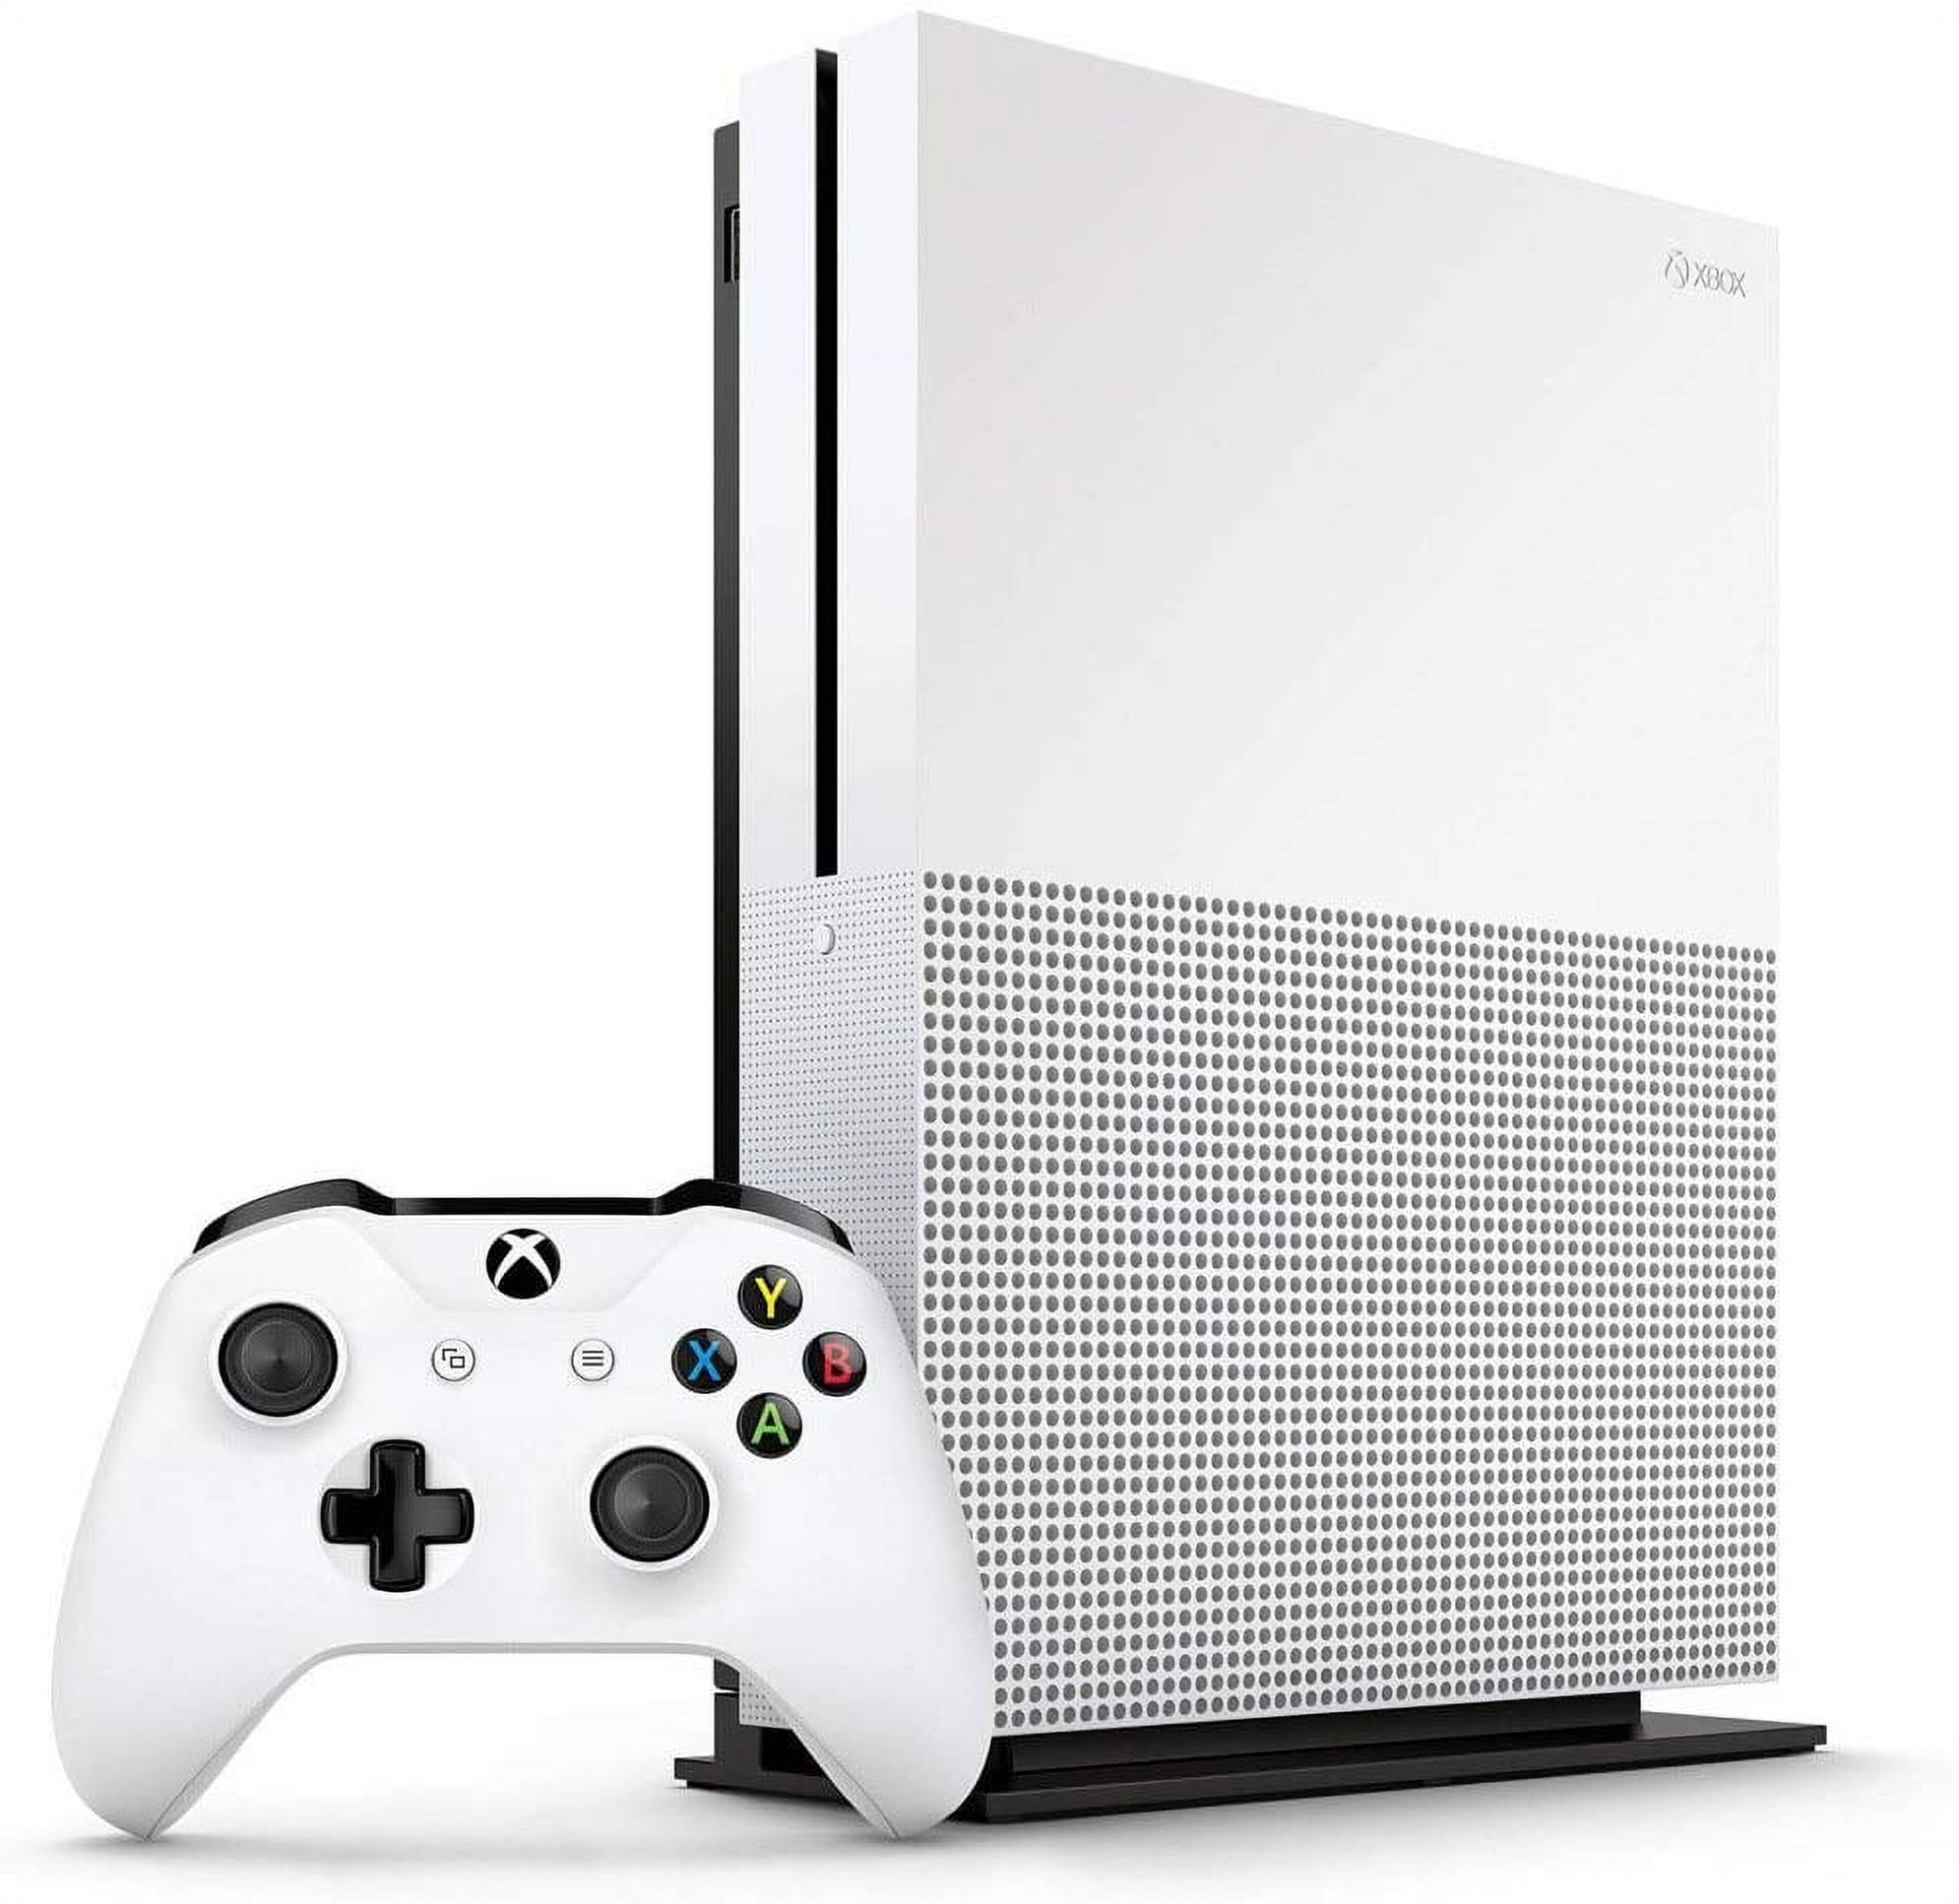 Microsoft Xbox One S 1TB Gaming Console Gray with Wireless Controller  -Manufacturer Refurbished